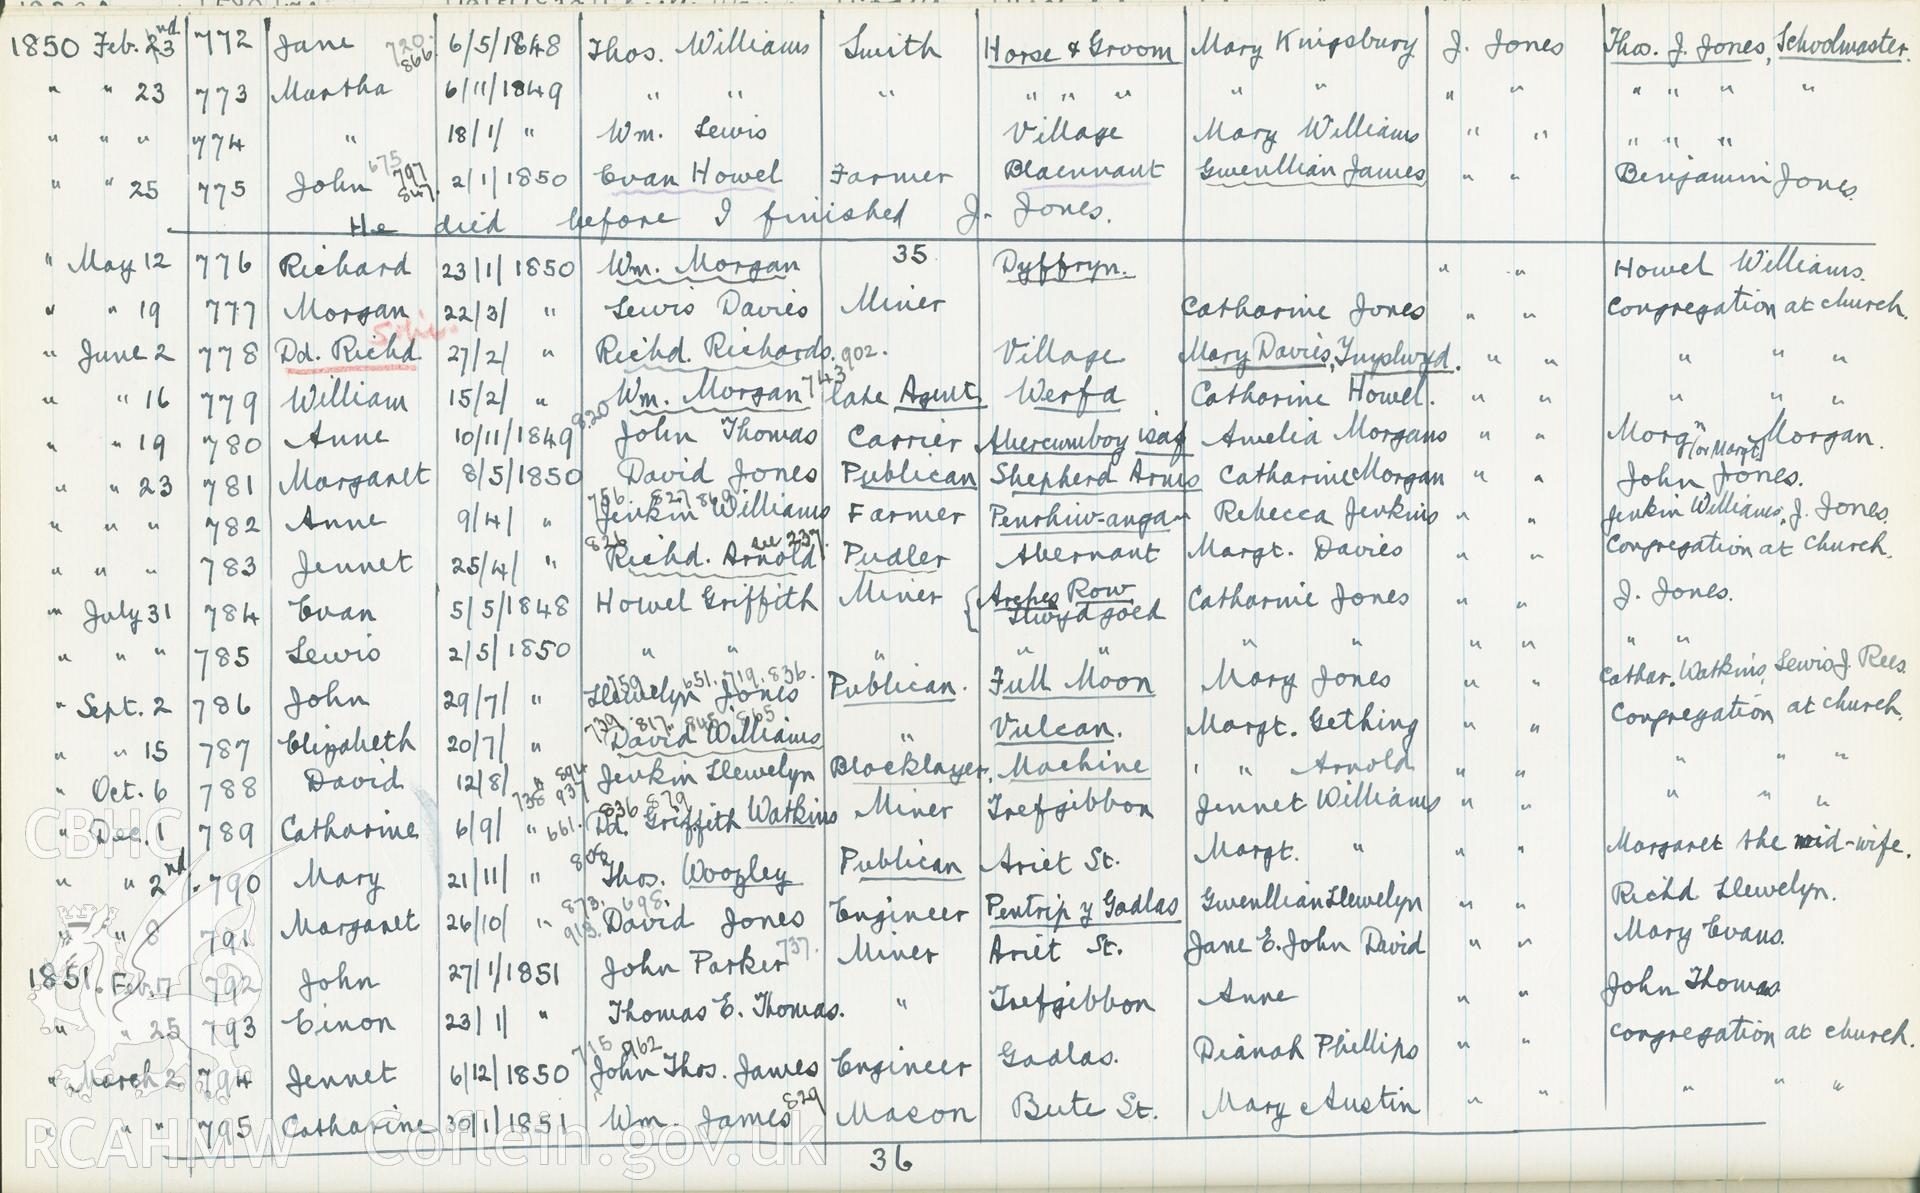 "Baptism Registered" book for Hen Dy Cwrdd, made between April 19th and 28th, 1941, by W. W. Price. Page listing baptisms from 23rd February 1850 to 2nd March 1851. Donated to the RCAHMW as part of the Digital Dissent Project.